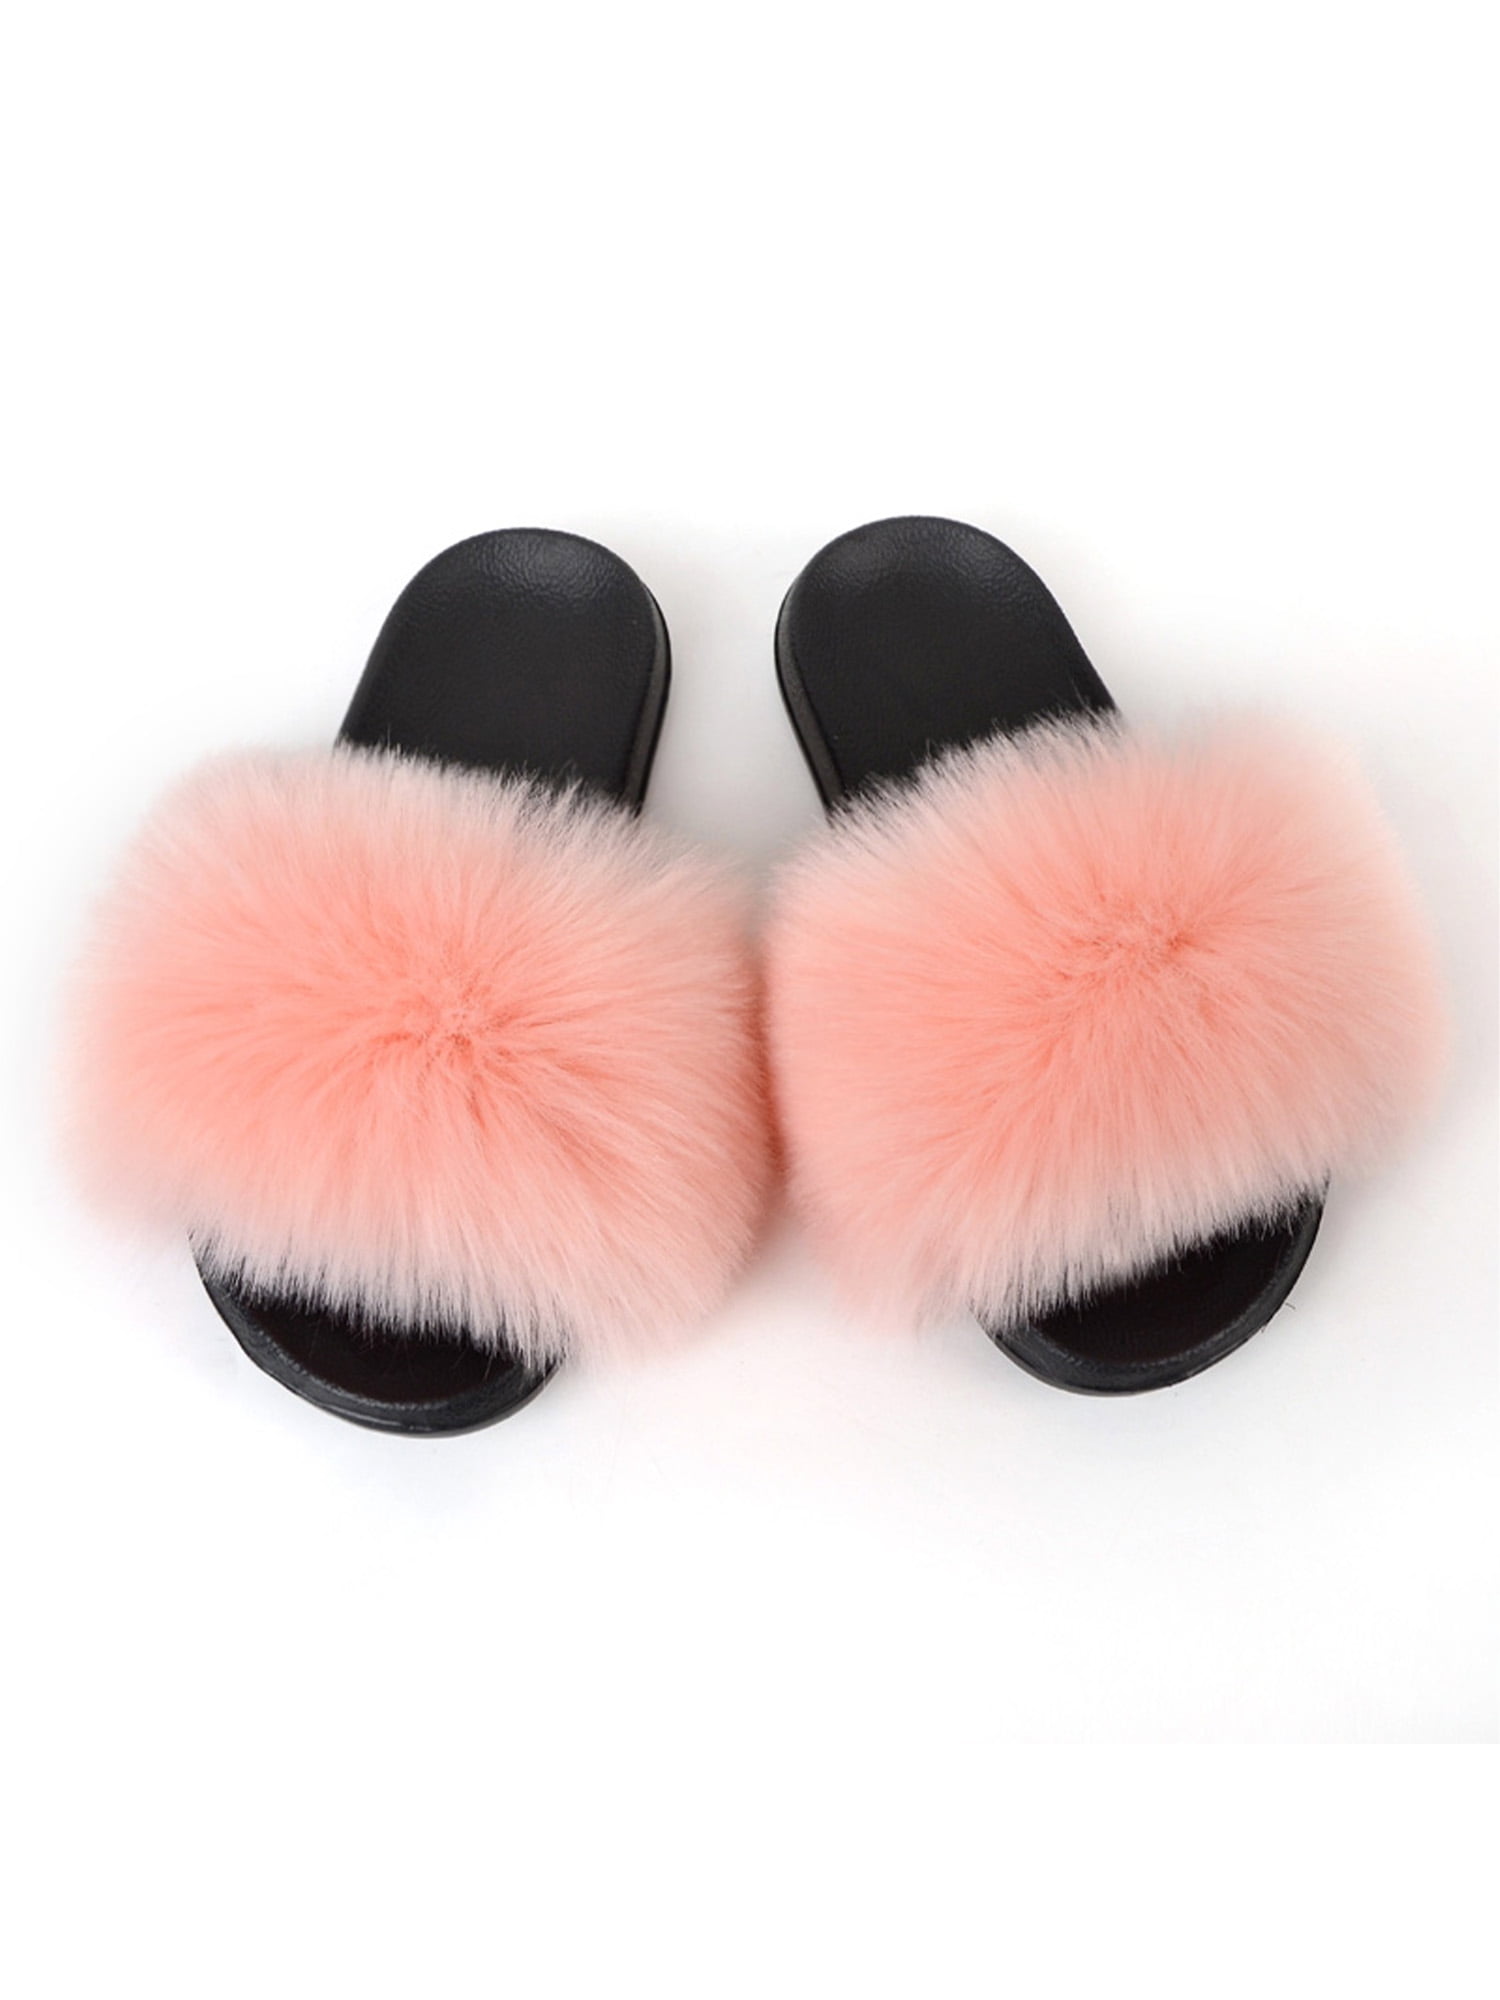 Women's Sandals Size 9 Faux Fur Slides Easy Hot Fluffy Hairy Pink